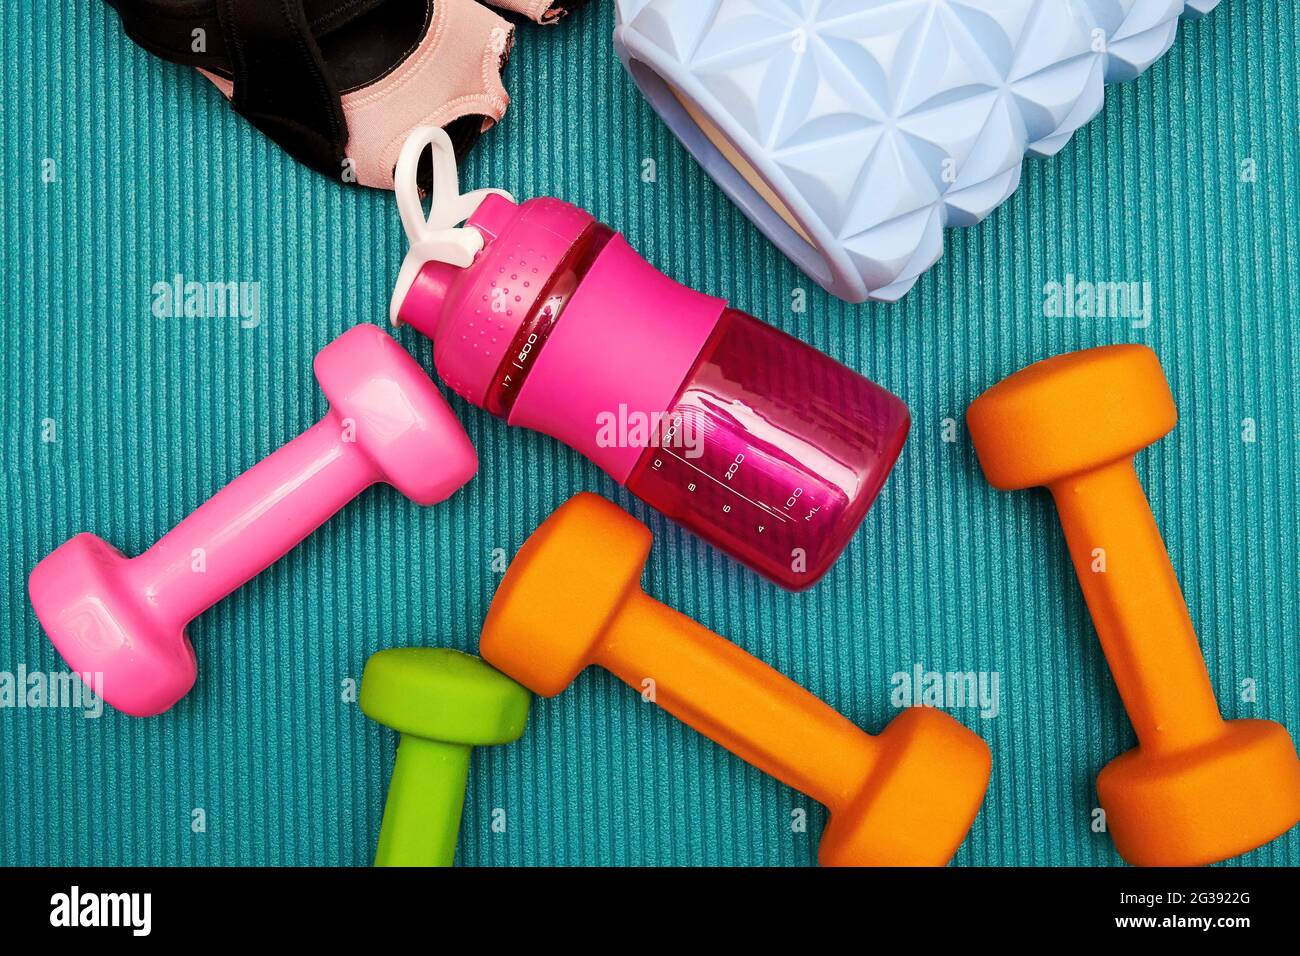 Women's fitness sneakers, dumbbell, roller, bottle, bricks scattered on the mat. Sports equipments and workout backgrounds Stock Photo